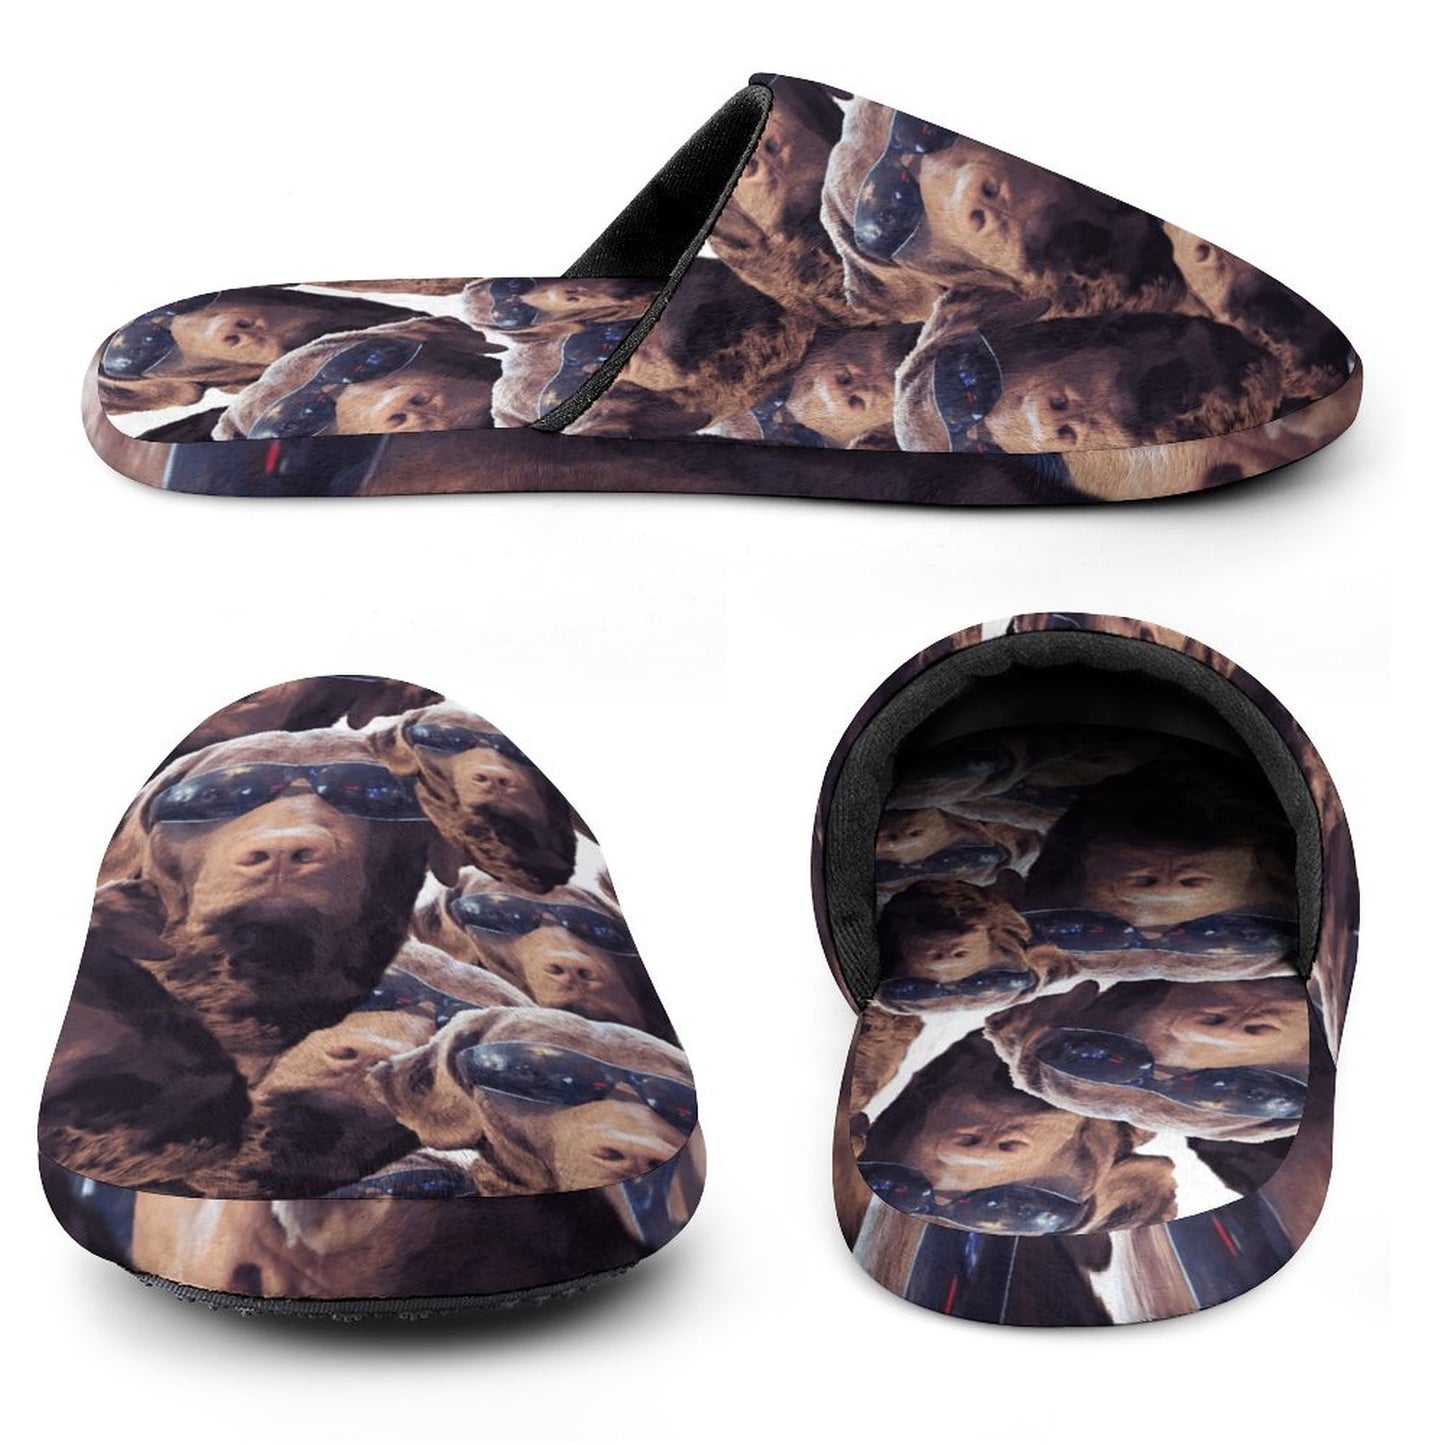 FOXY LADY _ LAB _ COLLAGE FACE DESIGN - Flannel Men's Cotton Slippers